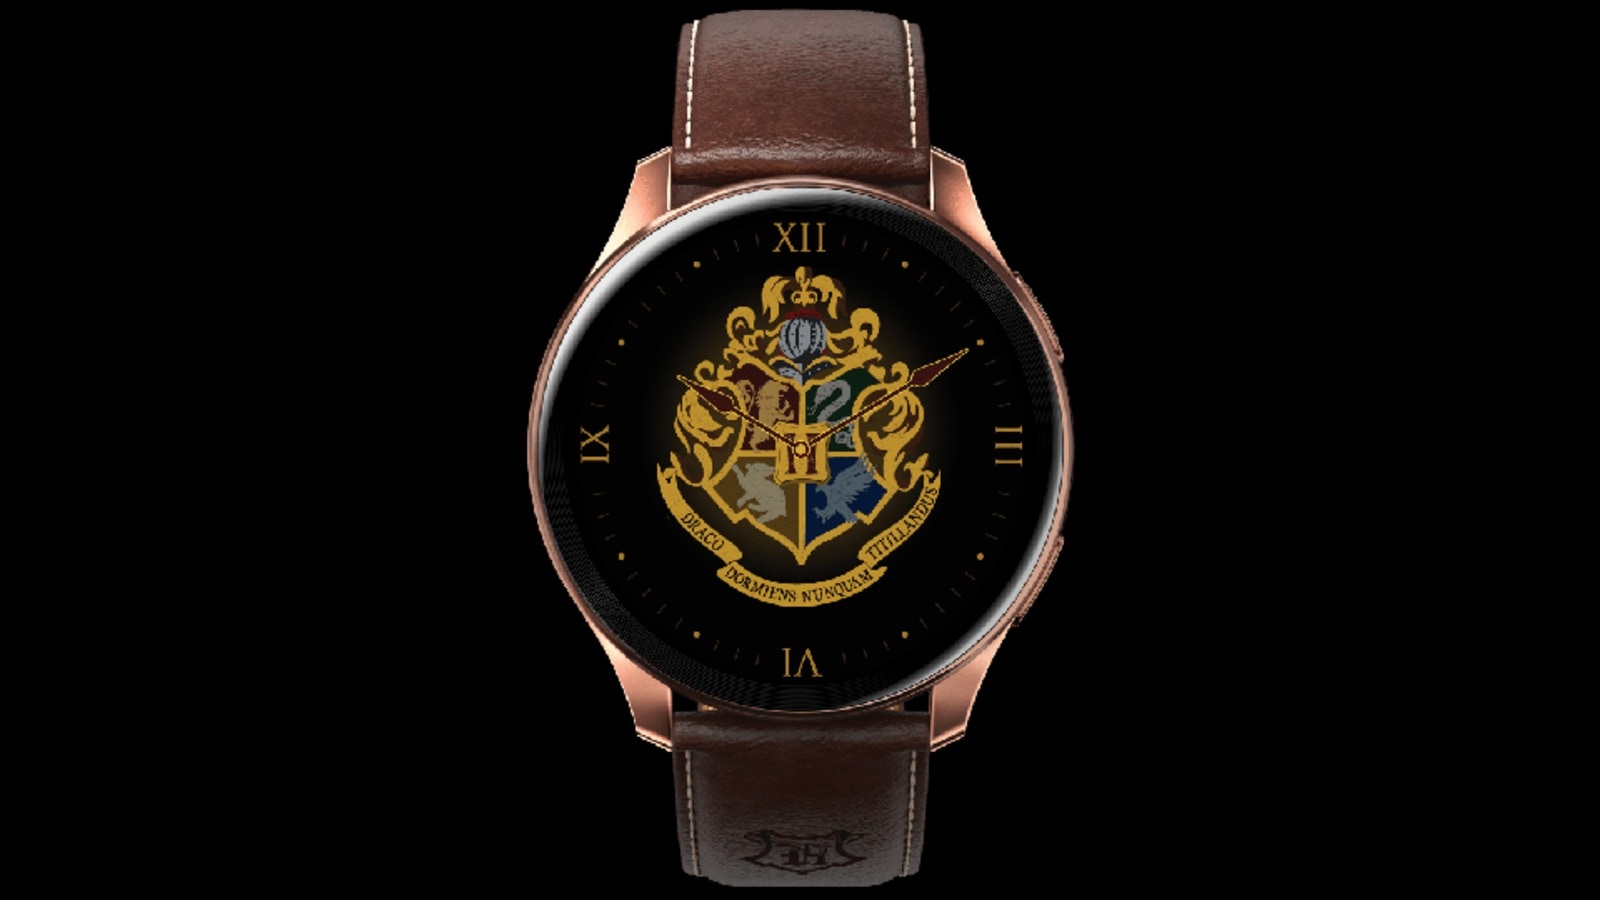 Limited-Edition Harry Potter Watch Launches in India